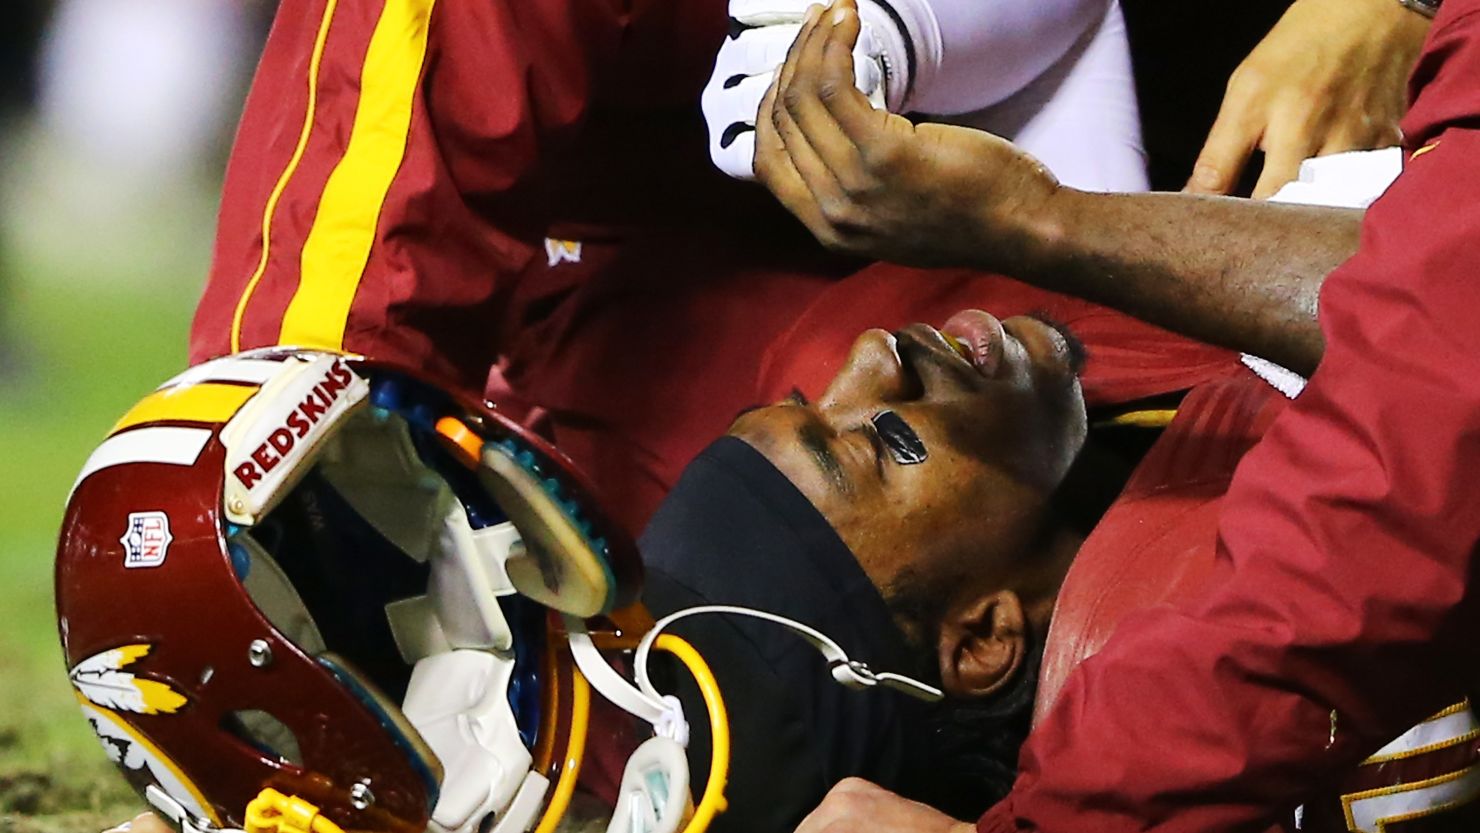 The Washington Redskins' Robert Griffin III lies injured in the fourth quarter against the Seahawks. 